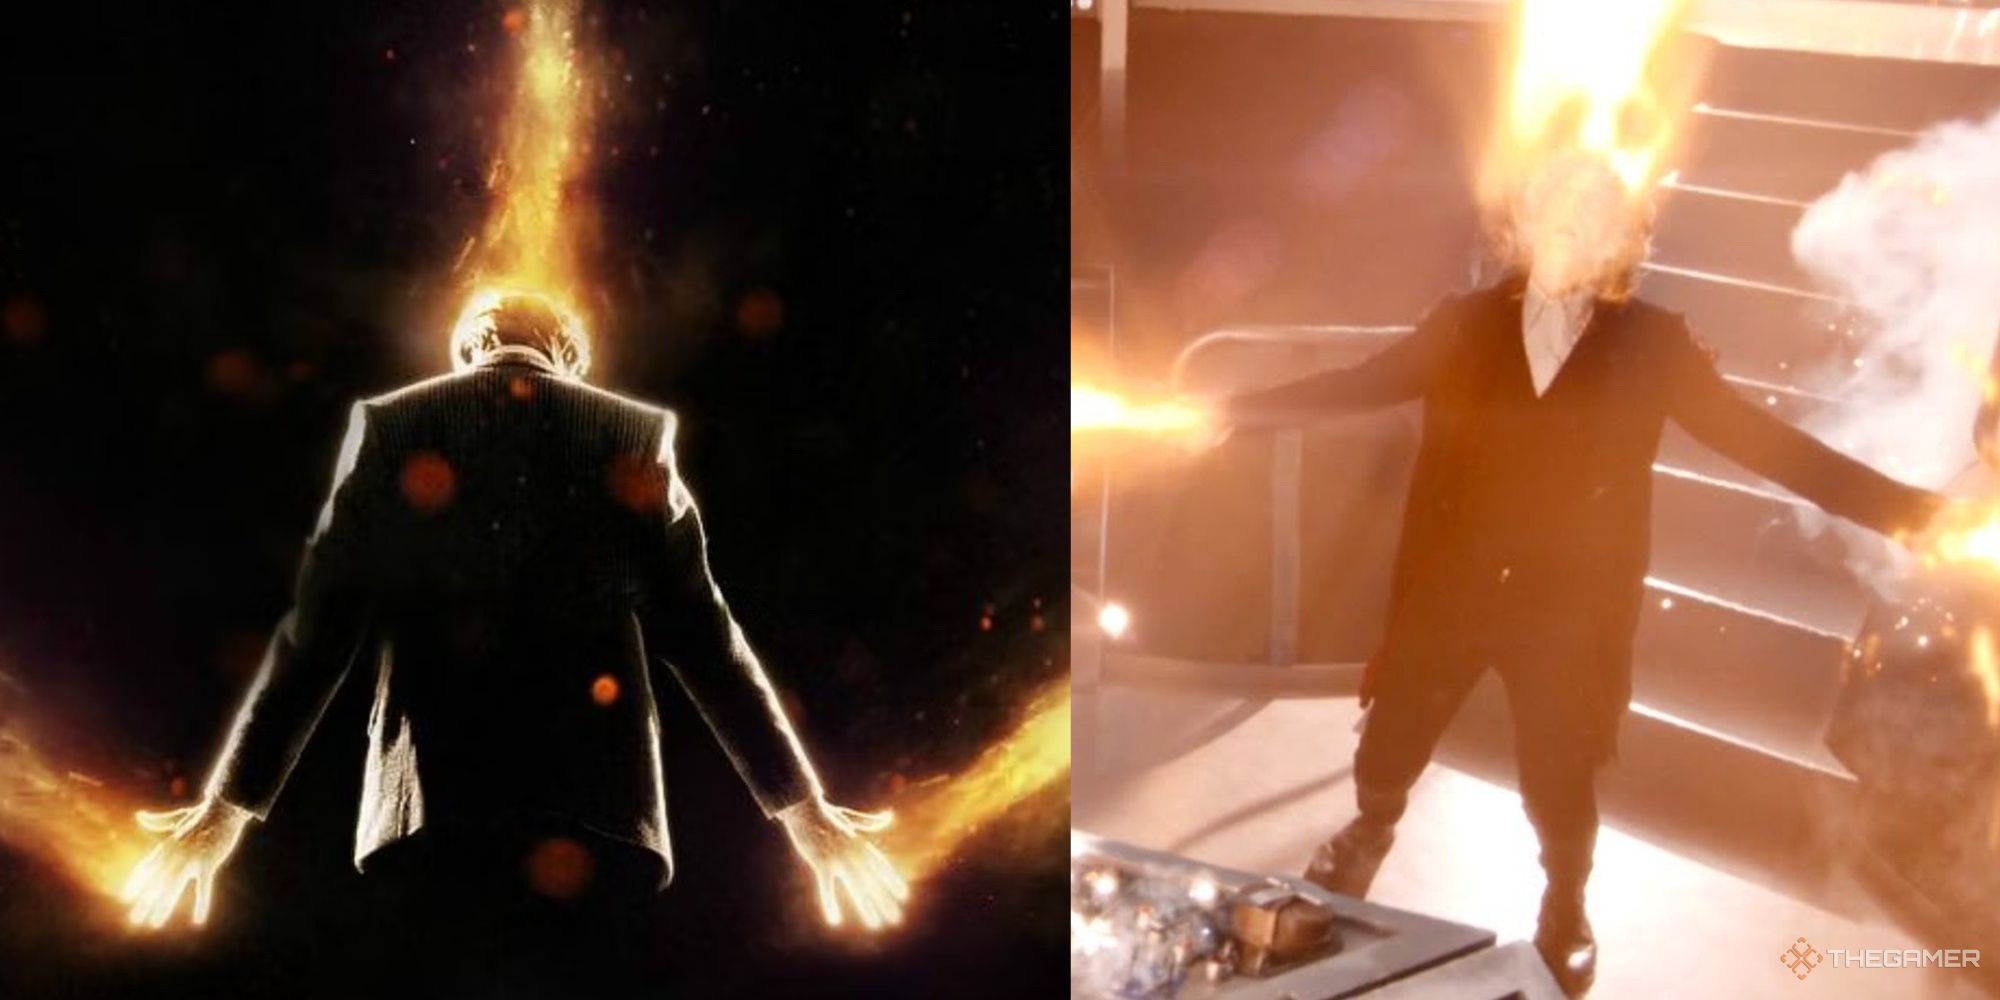 Doctor Who: Capaldi Regenerating And Key Art Of Time Lord Regeneration